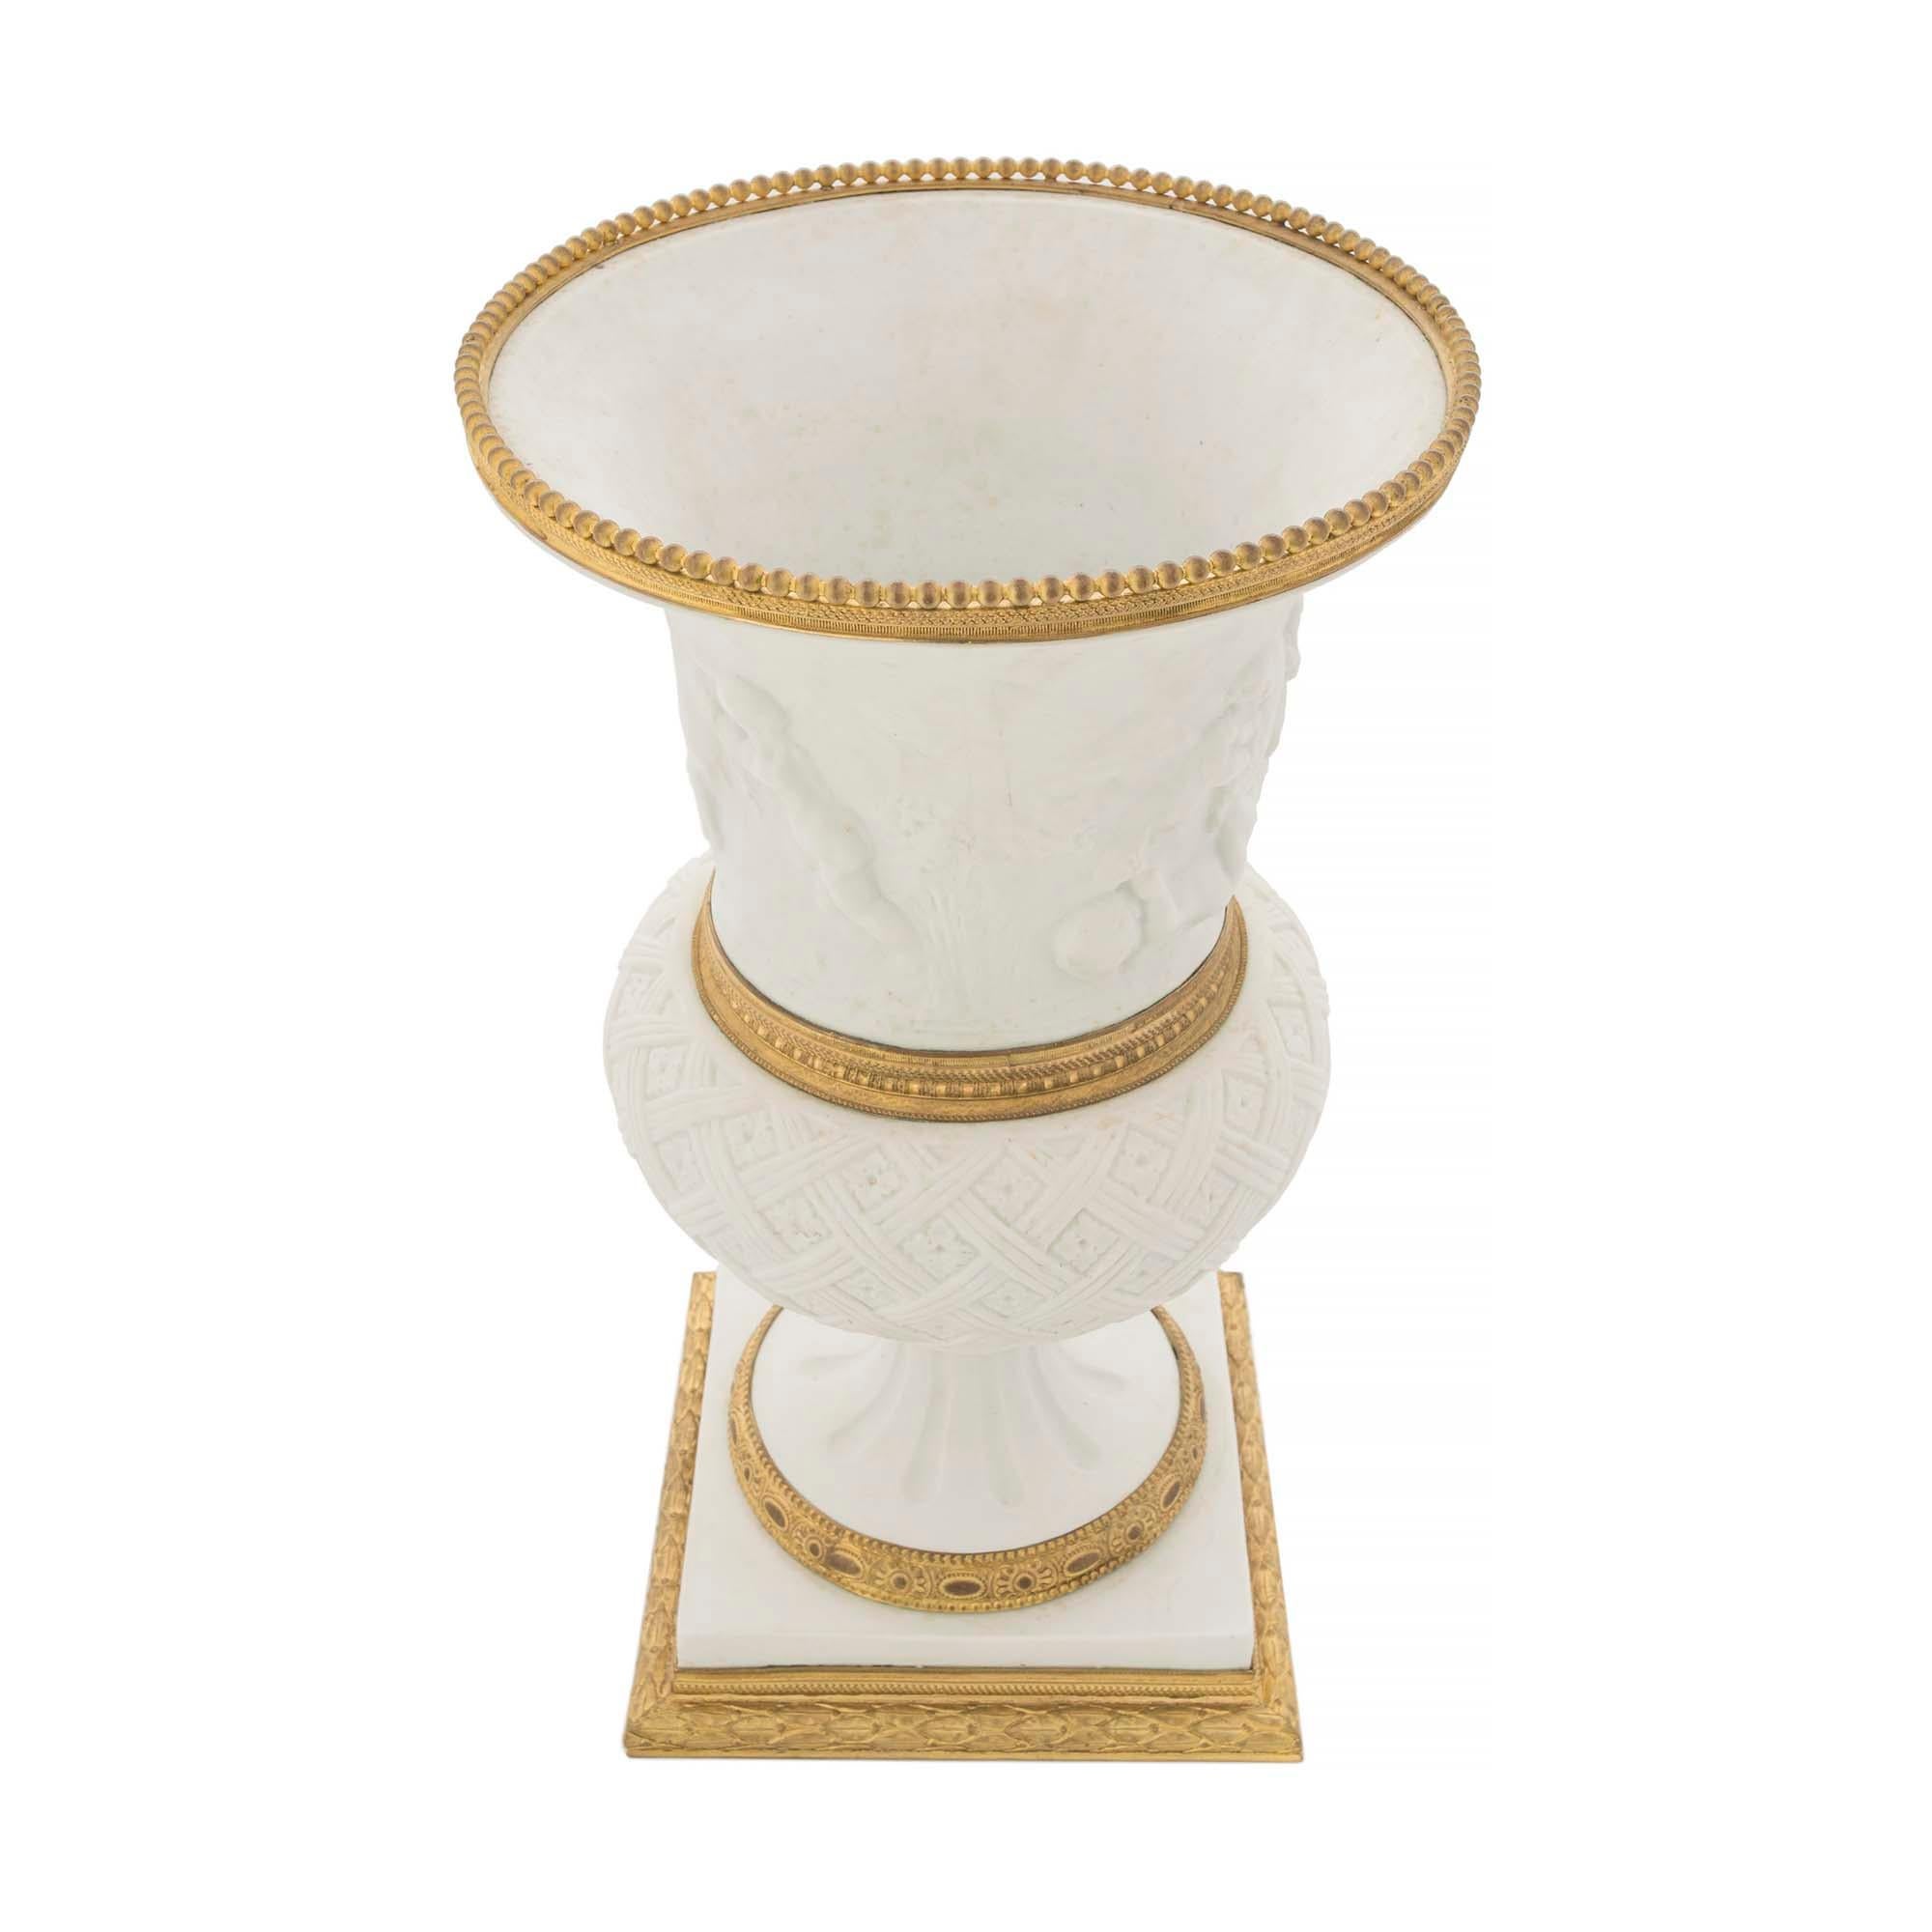 A very handsome French 19th century Louis XVI st. Biscuit de Sèvres porcelain and ormolu Medici designed vase. The vase is raised on a chased ormolu base below a square support and fluted socle adorned with foliate designed ormolu bands. An